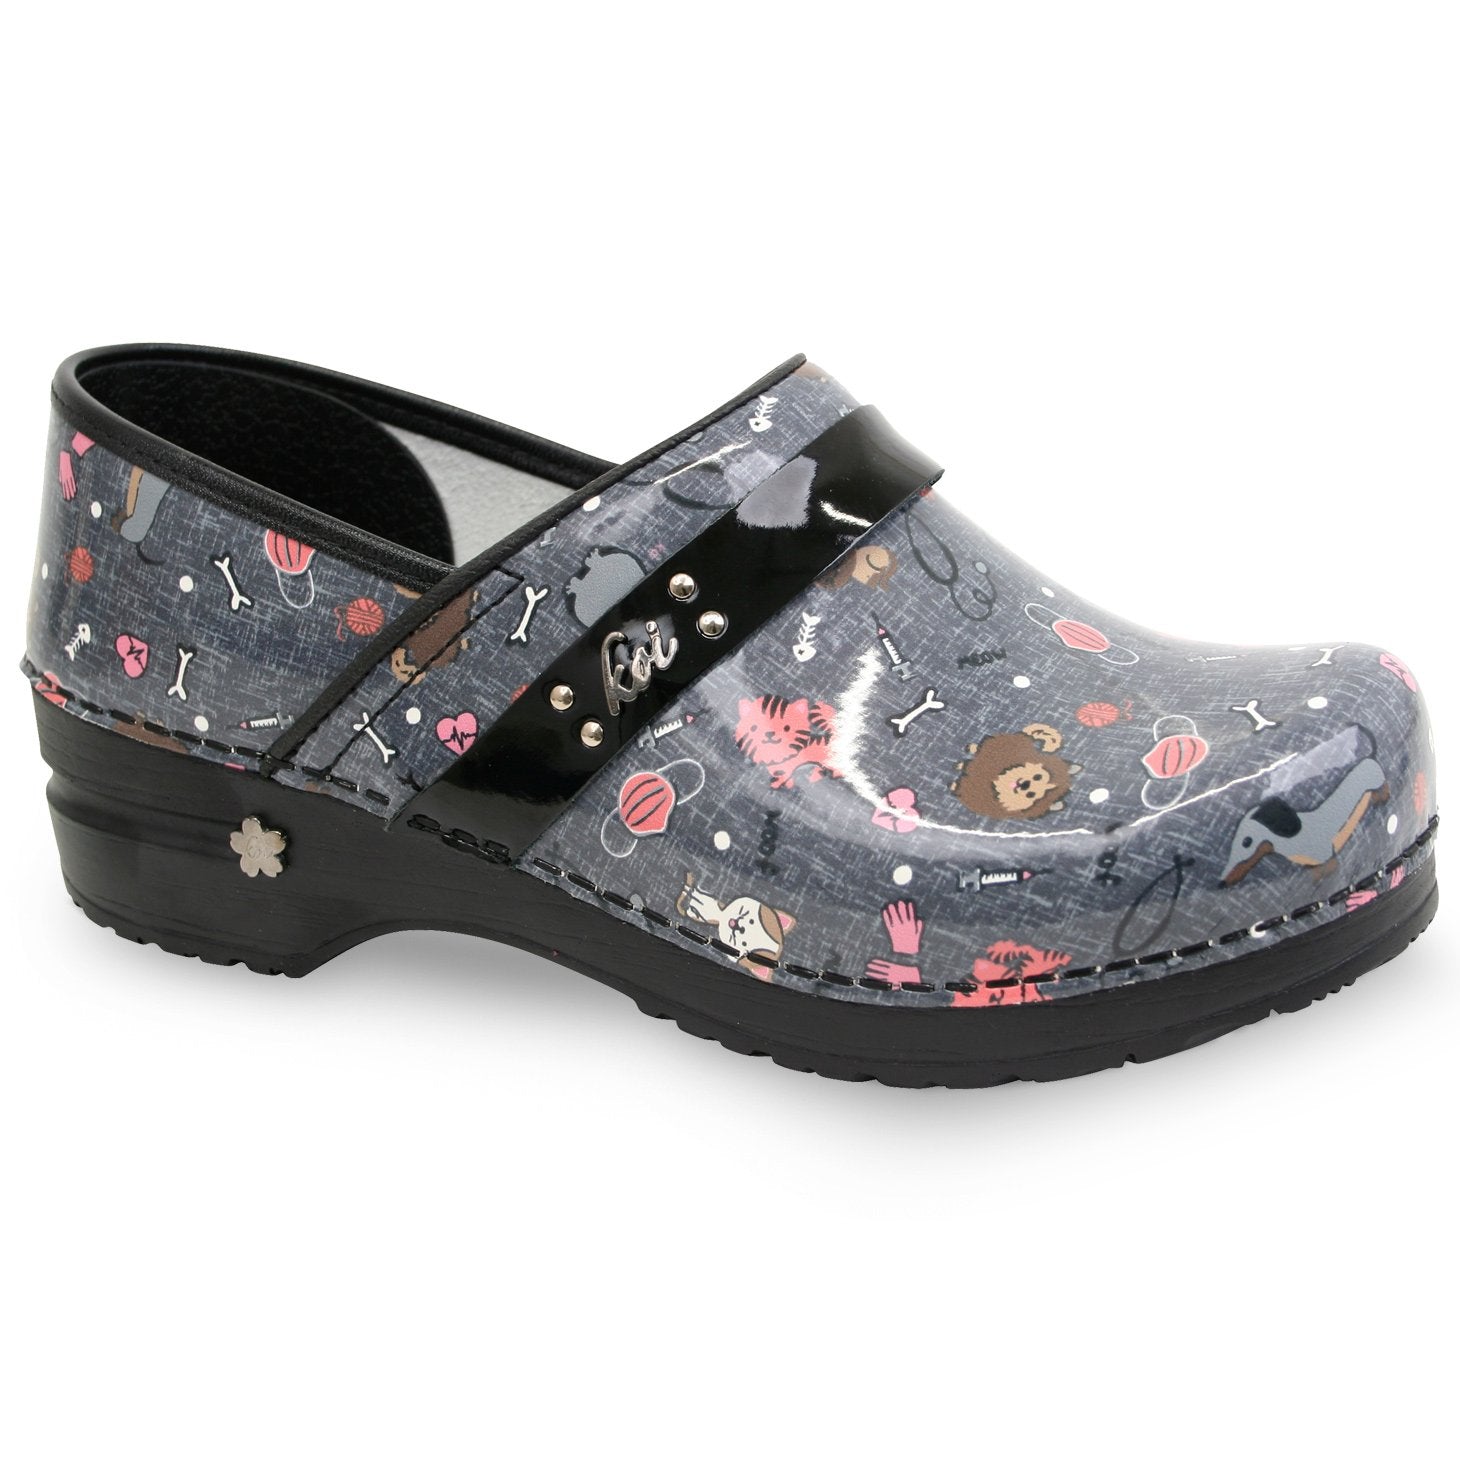 Sanita Meow Women's in Steel - avail. Spring '22 Closed Back Clog